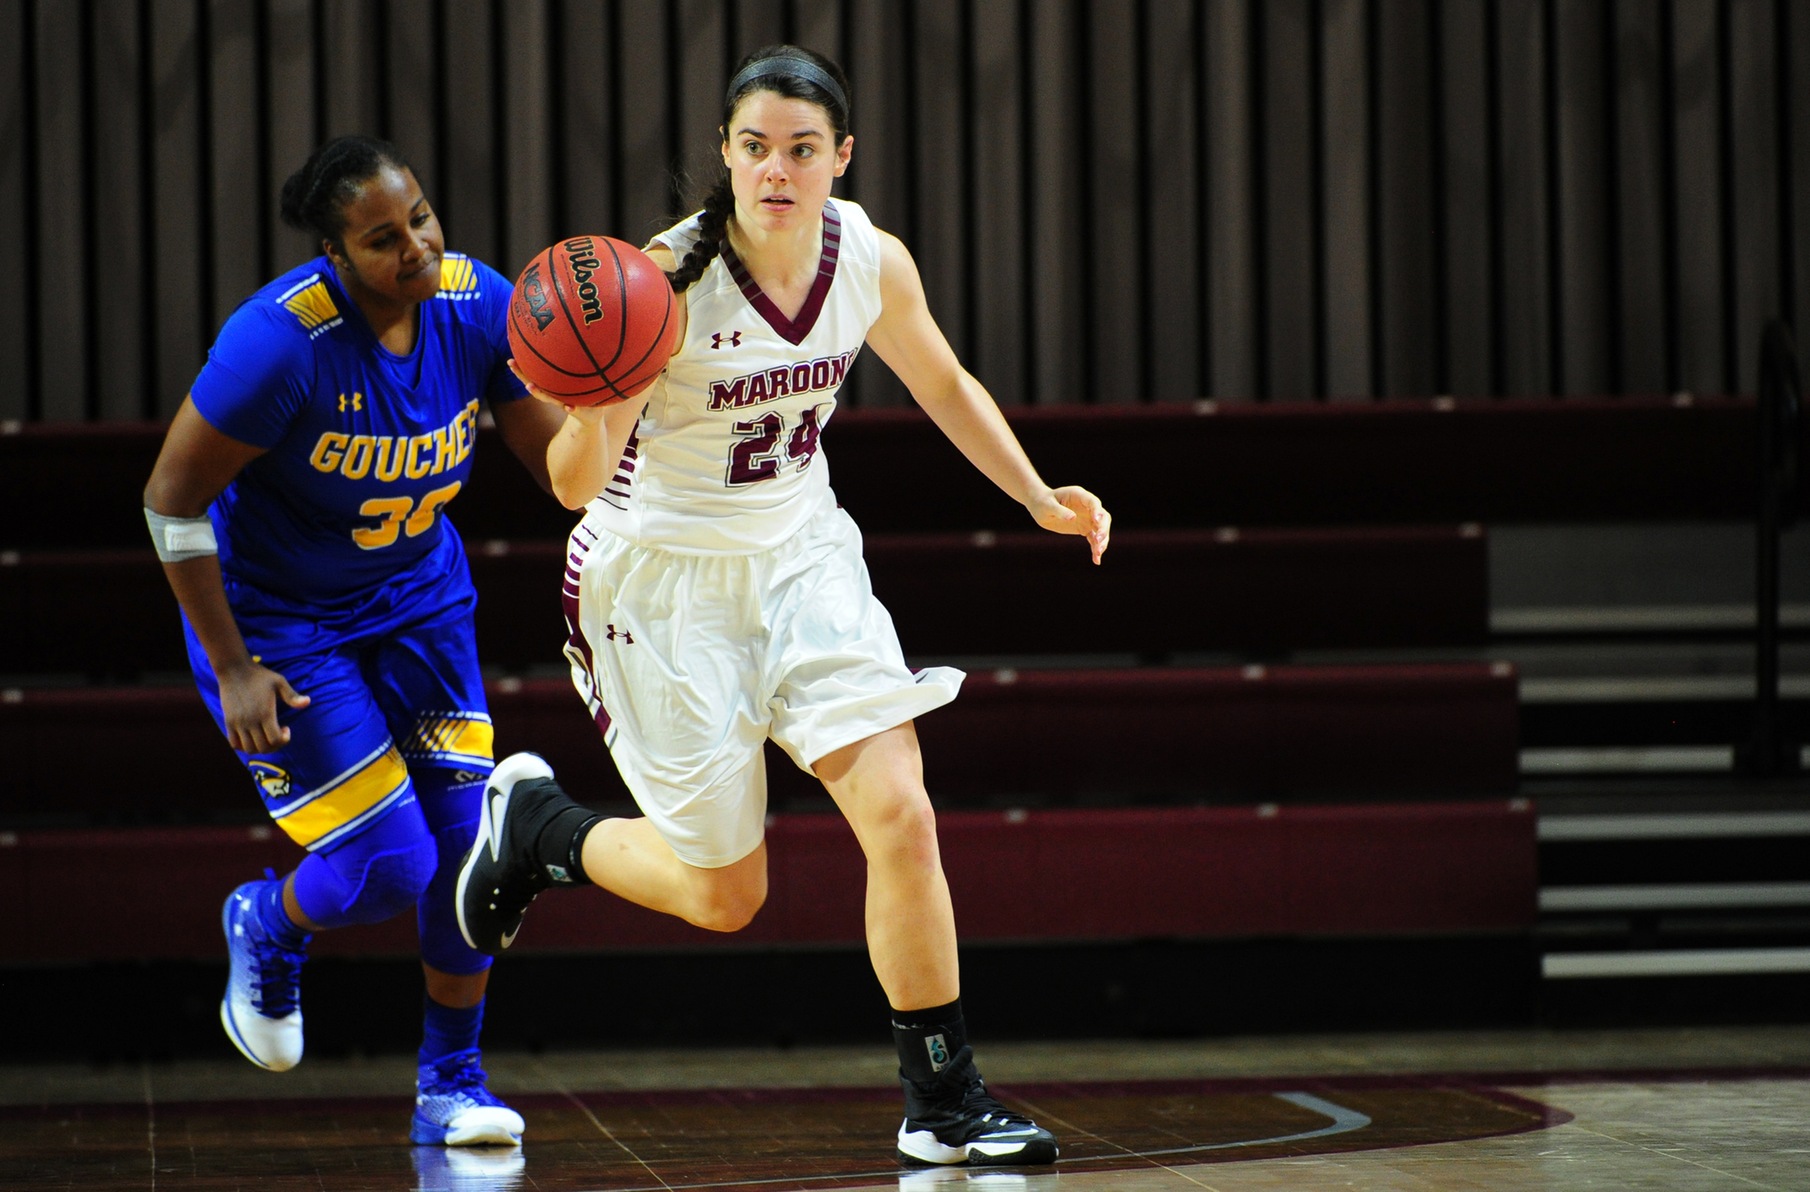 Bates Tops Roanoke 60-52 on Tuesday Afternoon